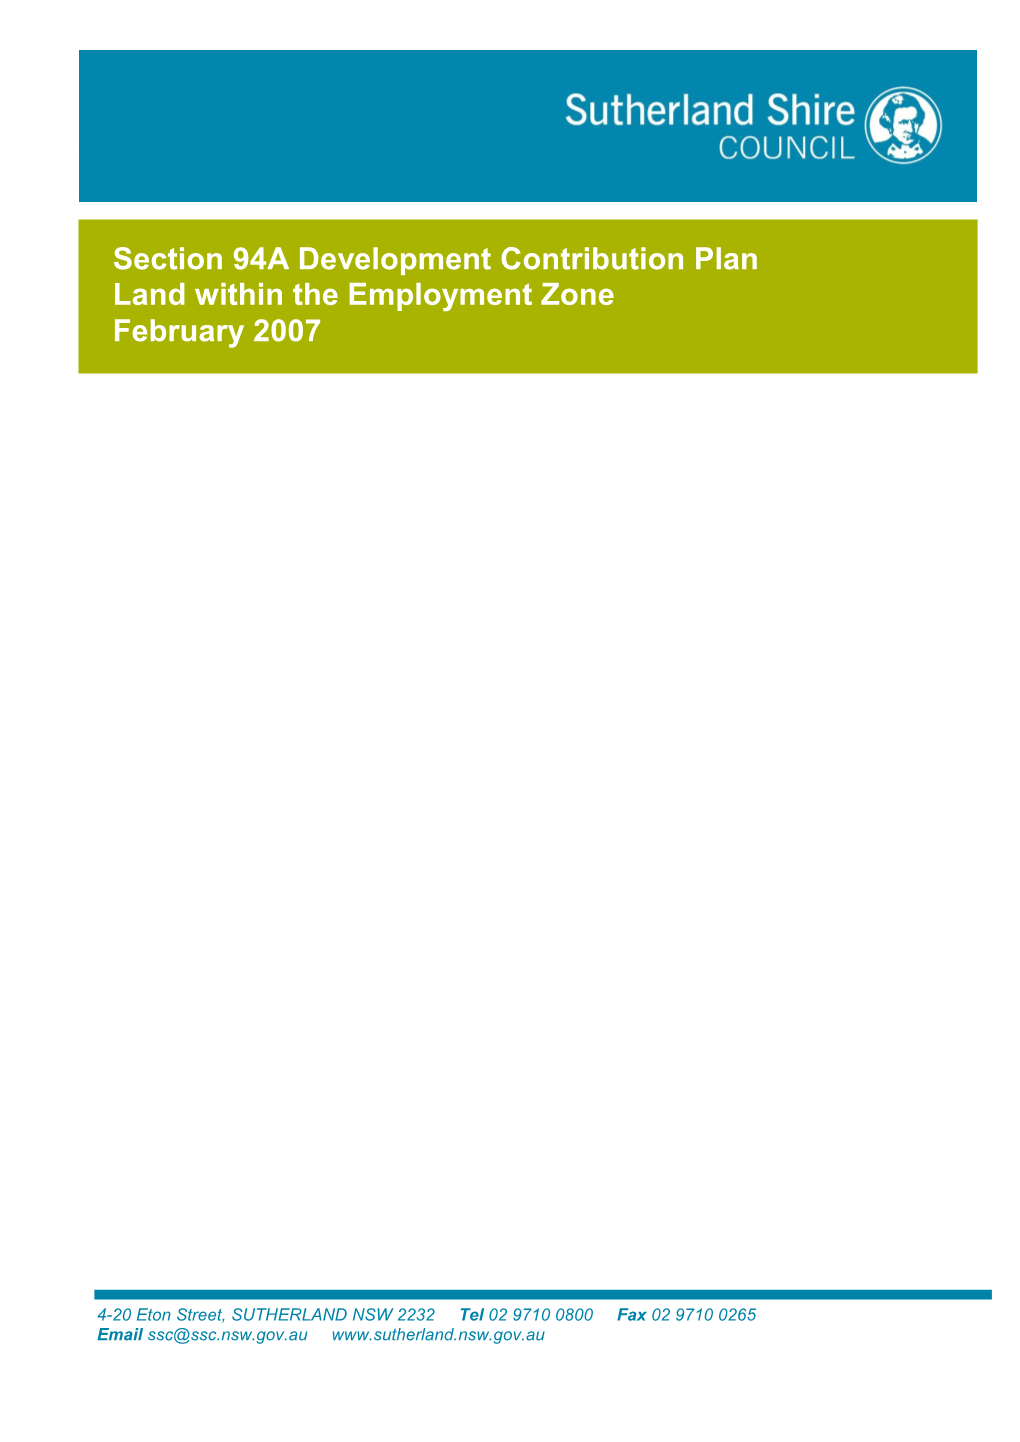 Section 94A Development Contribution Plan Land Within the Employment Zone February 2007